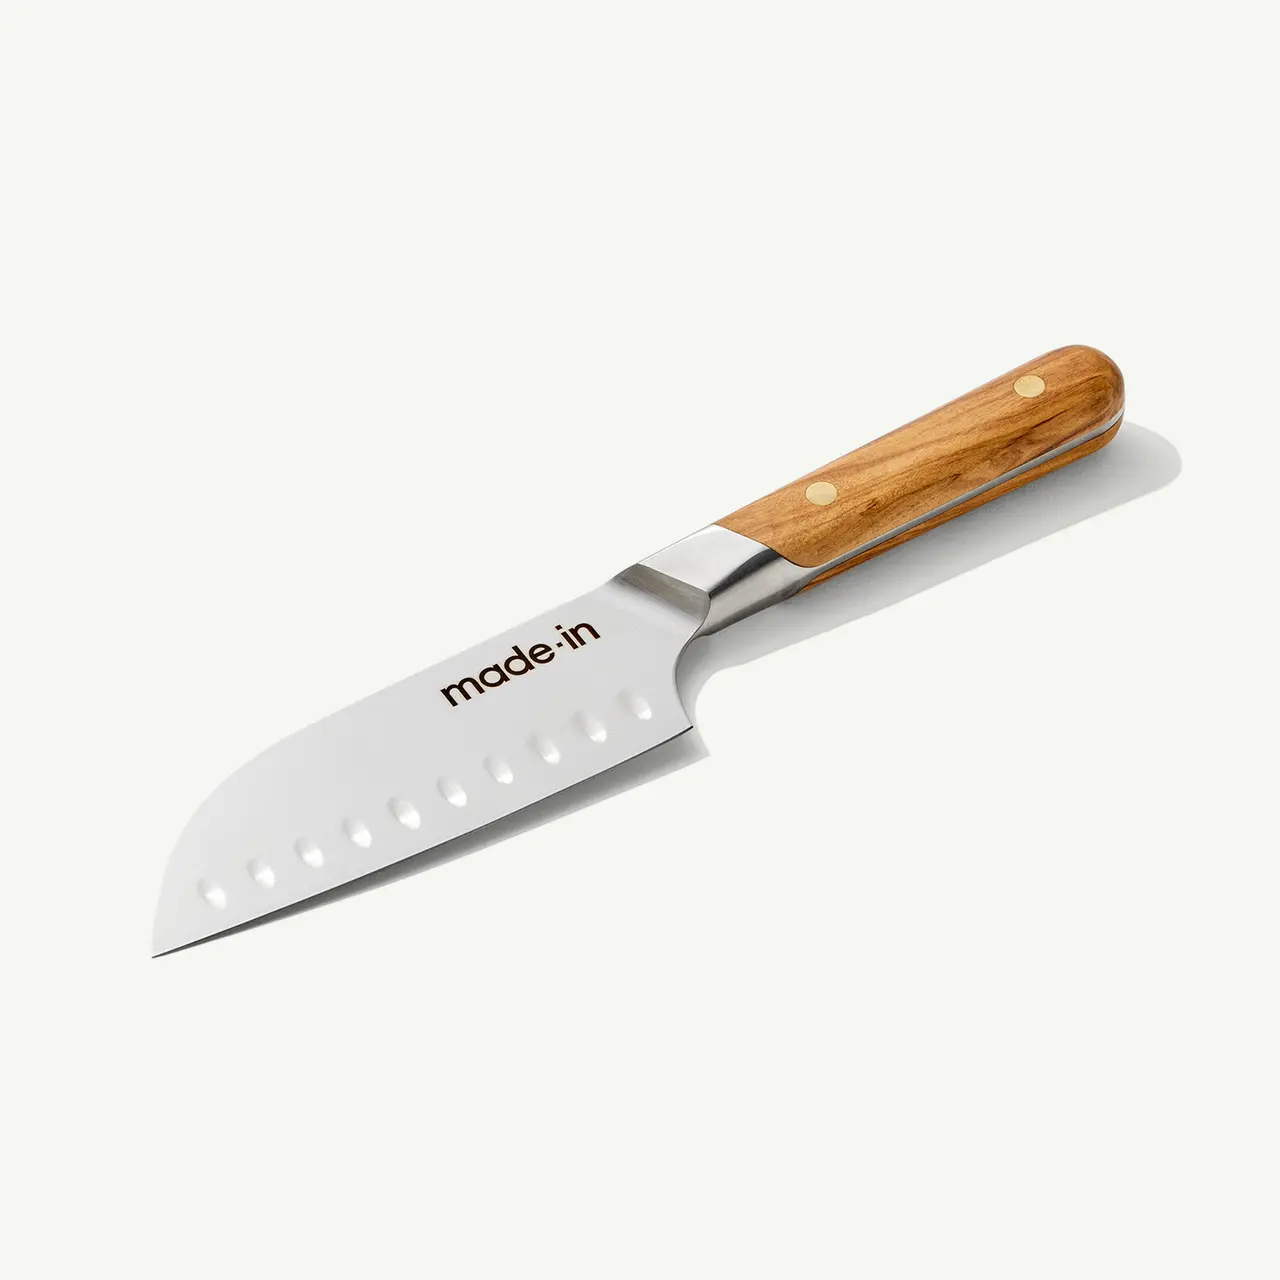 A stainless steel chef's knife with a wooden handle and branded text lies against a plain background.